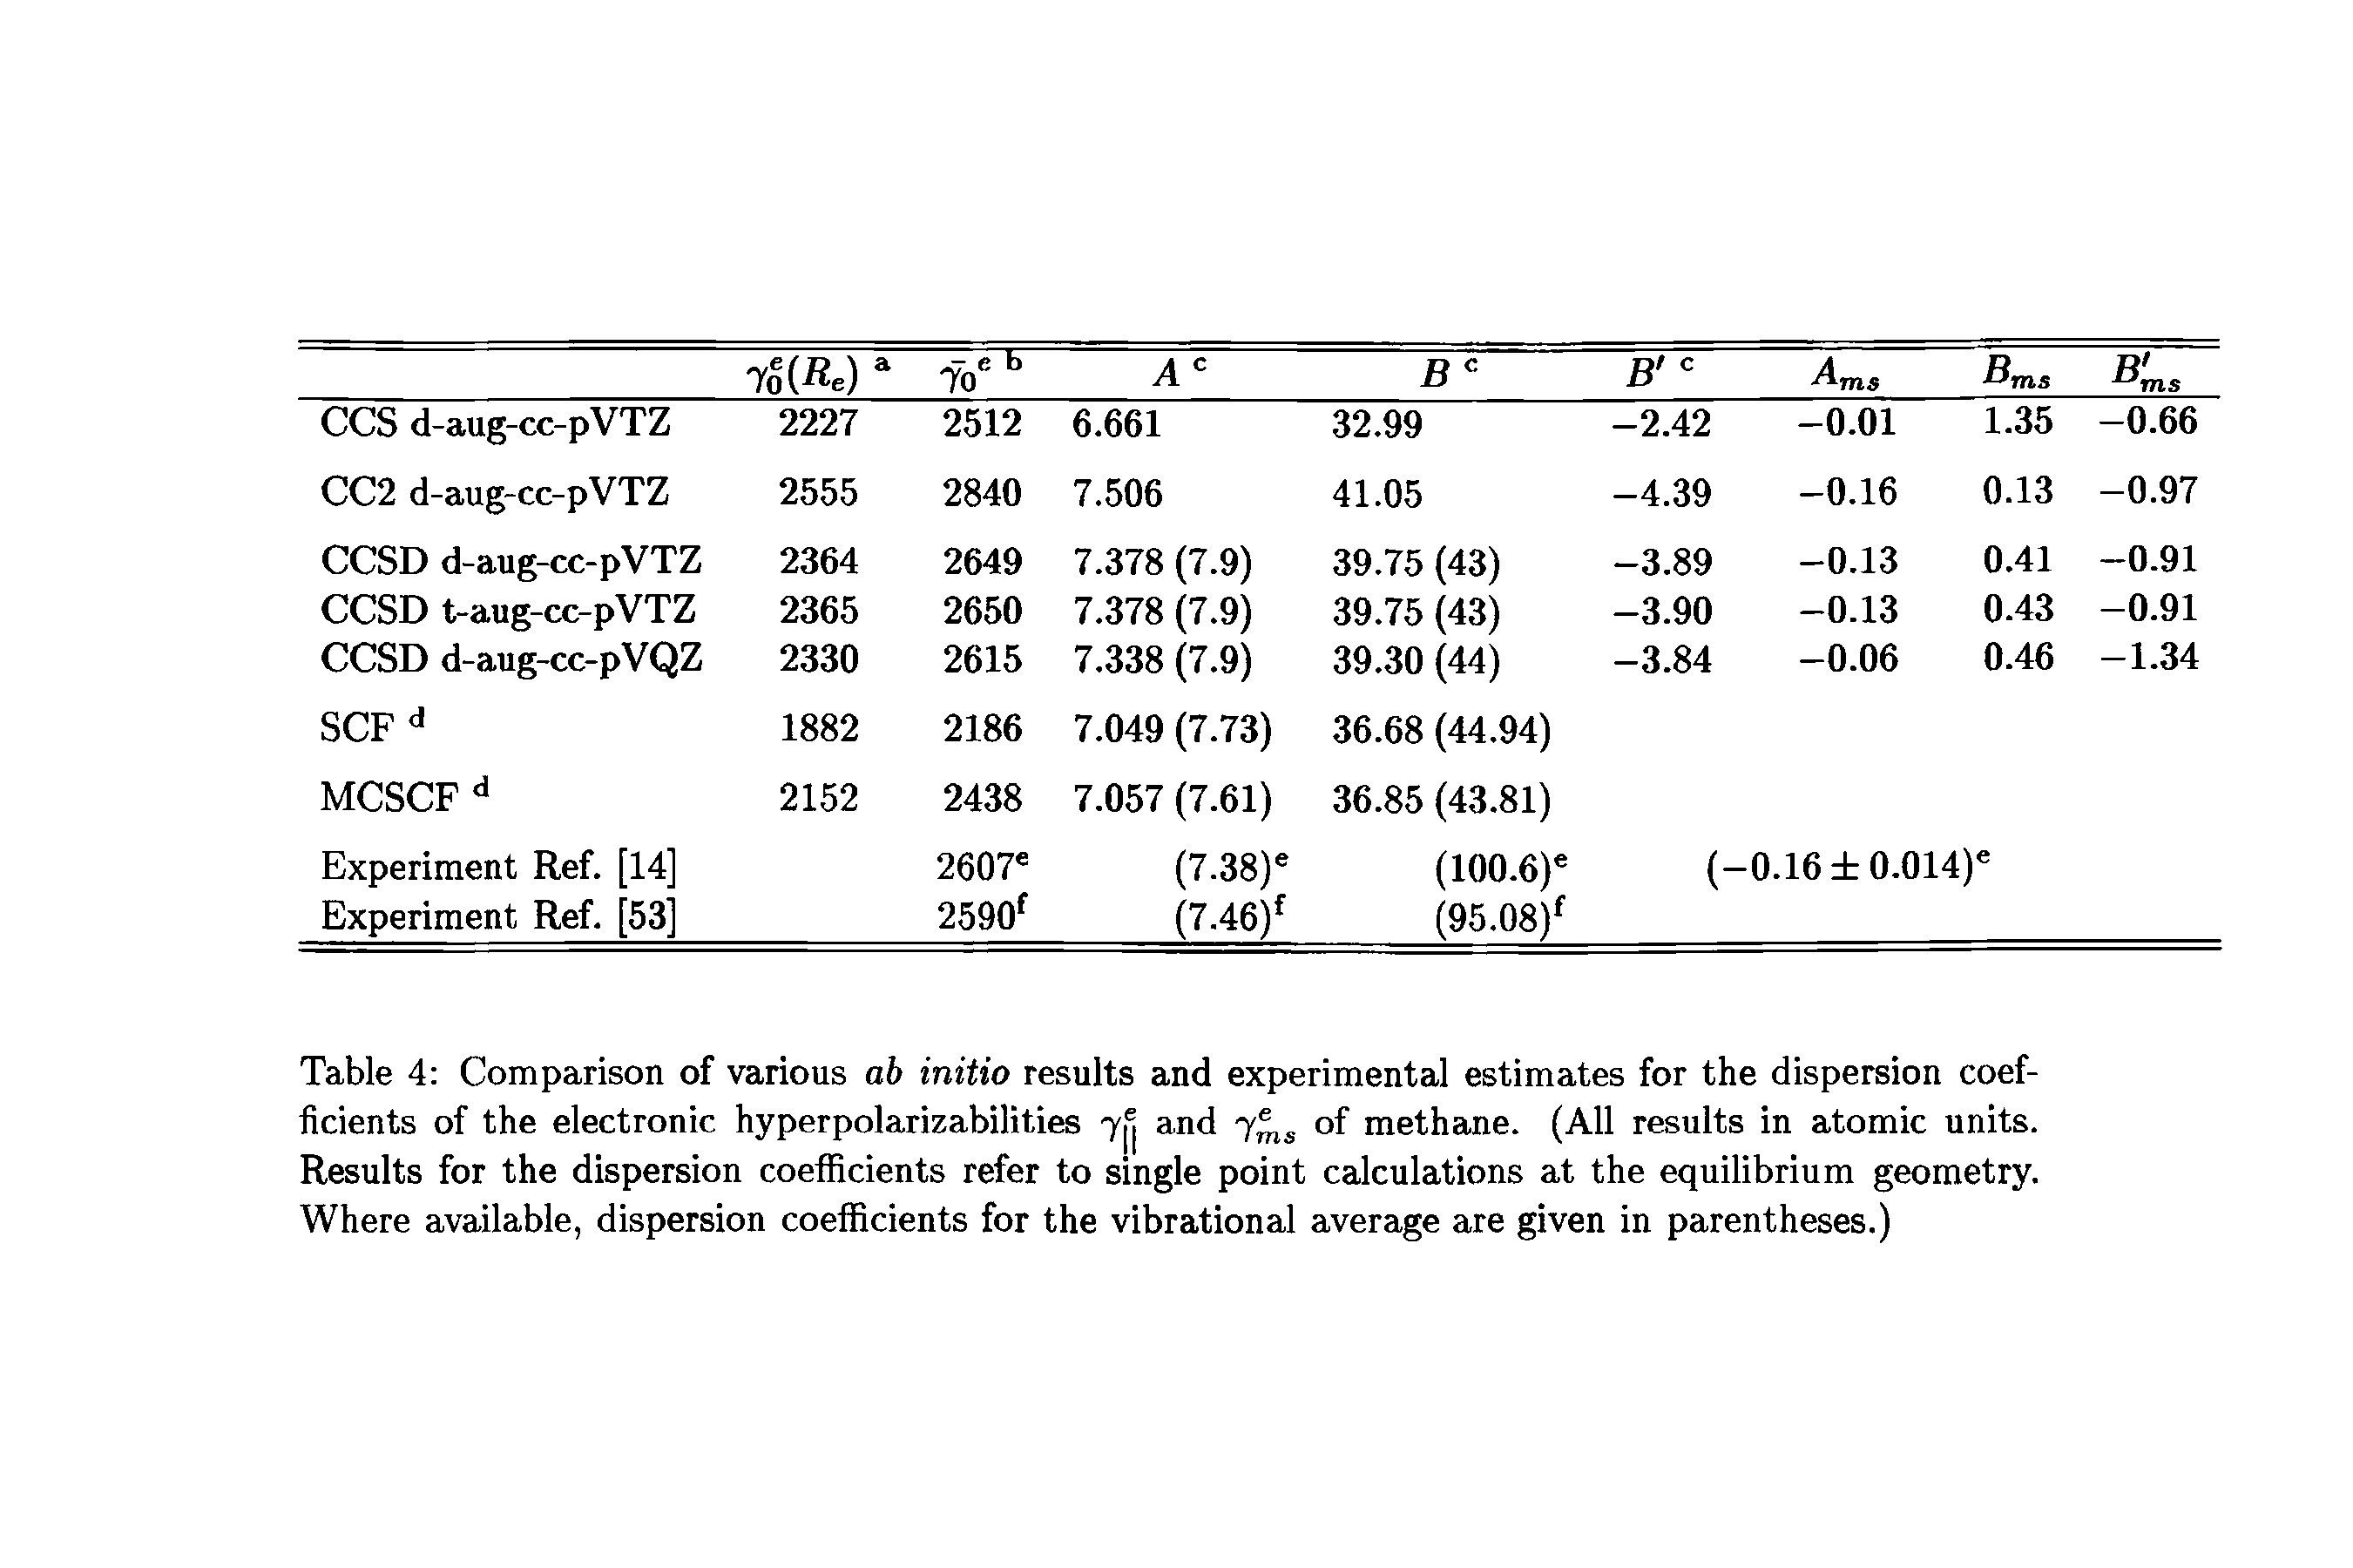 Table 4 Comparison of various ab initio results and experimental estimates for the dispersion coefficients of the electronic hyperpolarizabilities 7jj and 7 of methane. (All results in atomic units. Results for the dispersion coefficients refer to single point calculations at the equilibrium geometry. Where available, dispersion coefficients for the vibrational average are given in parentheses.)...